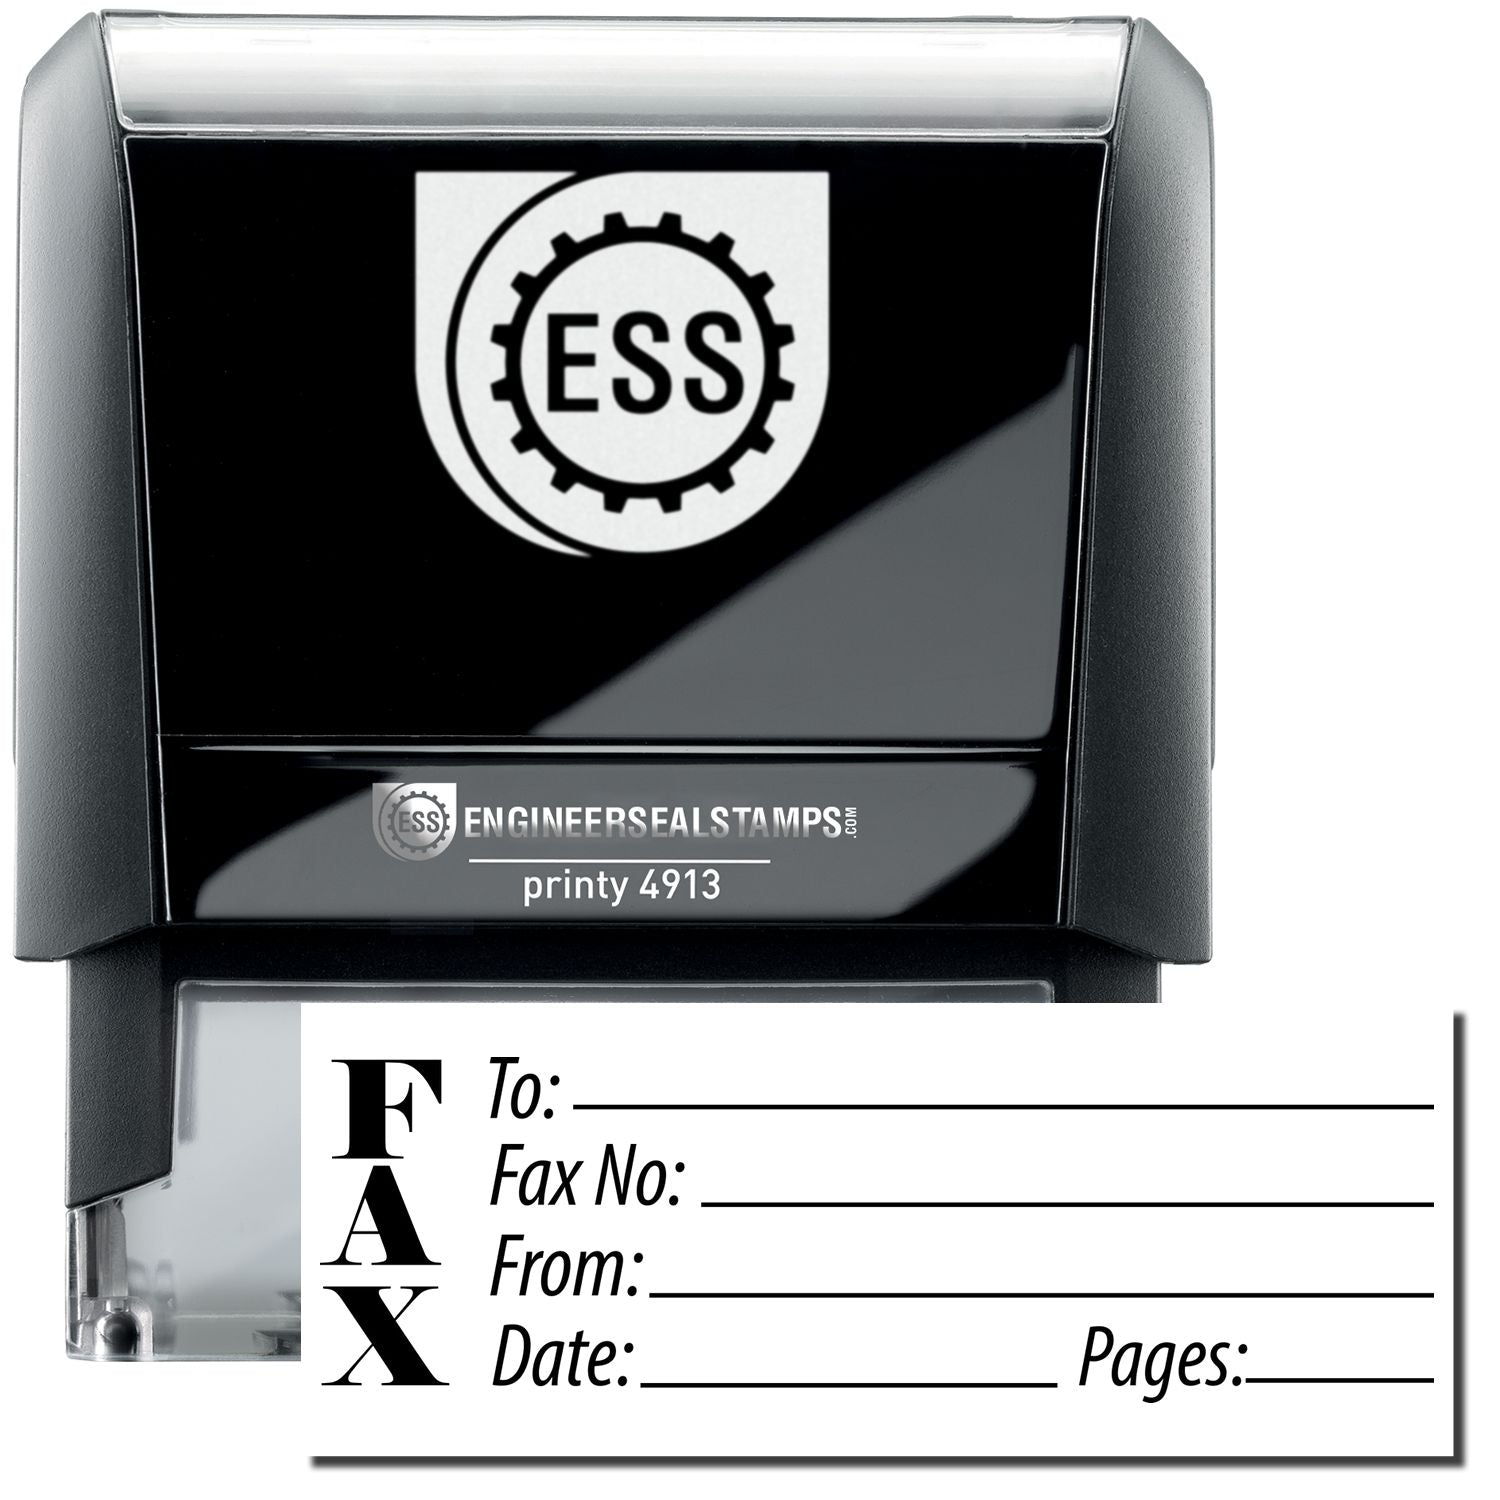 A self-inking stamp with a stamped image showing how the text "FAX" (each letter displaying vertically) in a large font with spaces given for mentioning a recipient's name, the fax number, who is sending the fax, when the fax is being sent, and how many pages the fax is composed of on the right side is displayed after stamping.